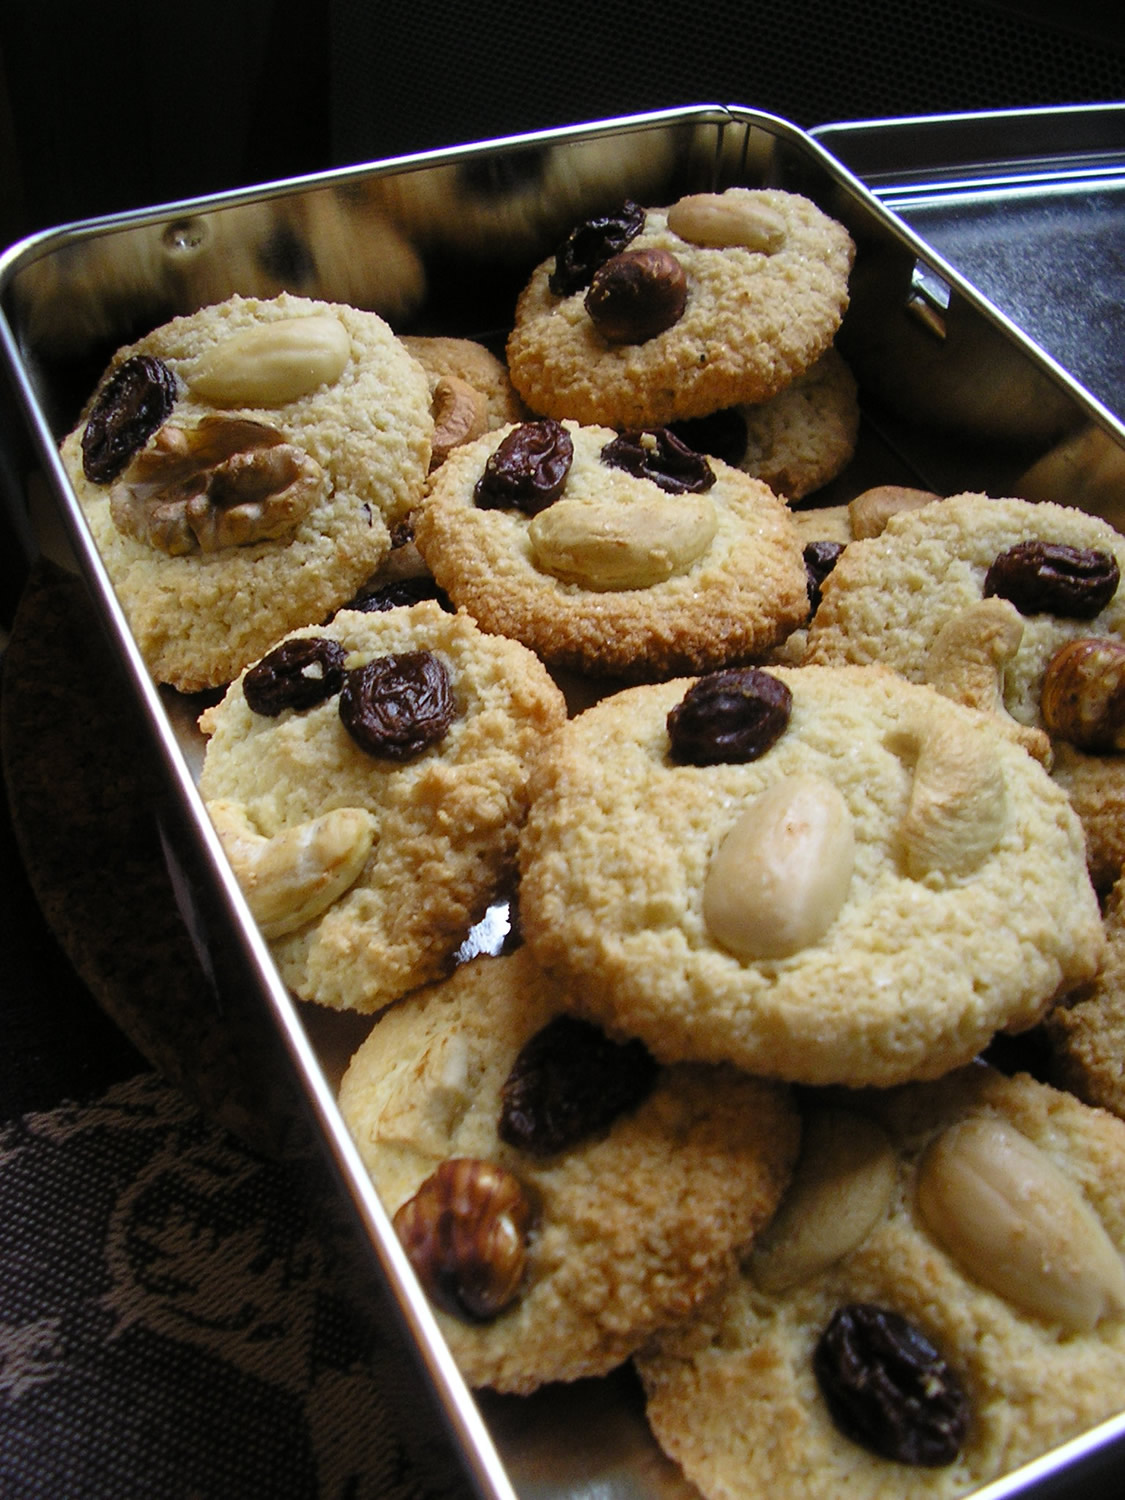 Cookies without milk or gluten